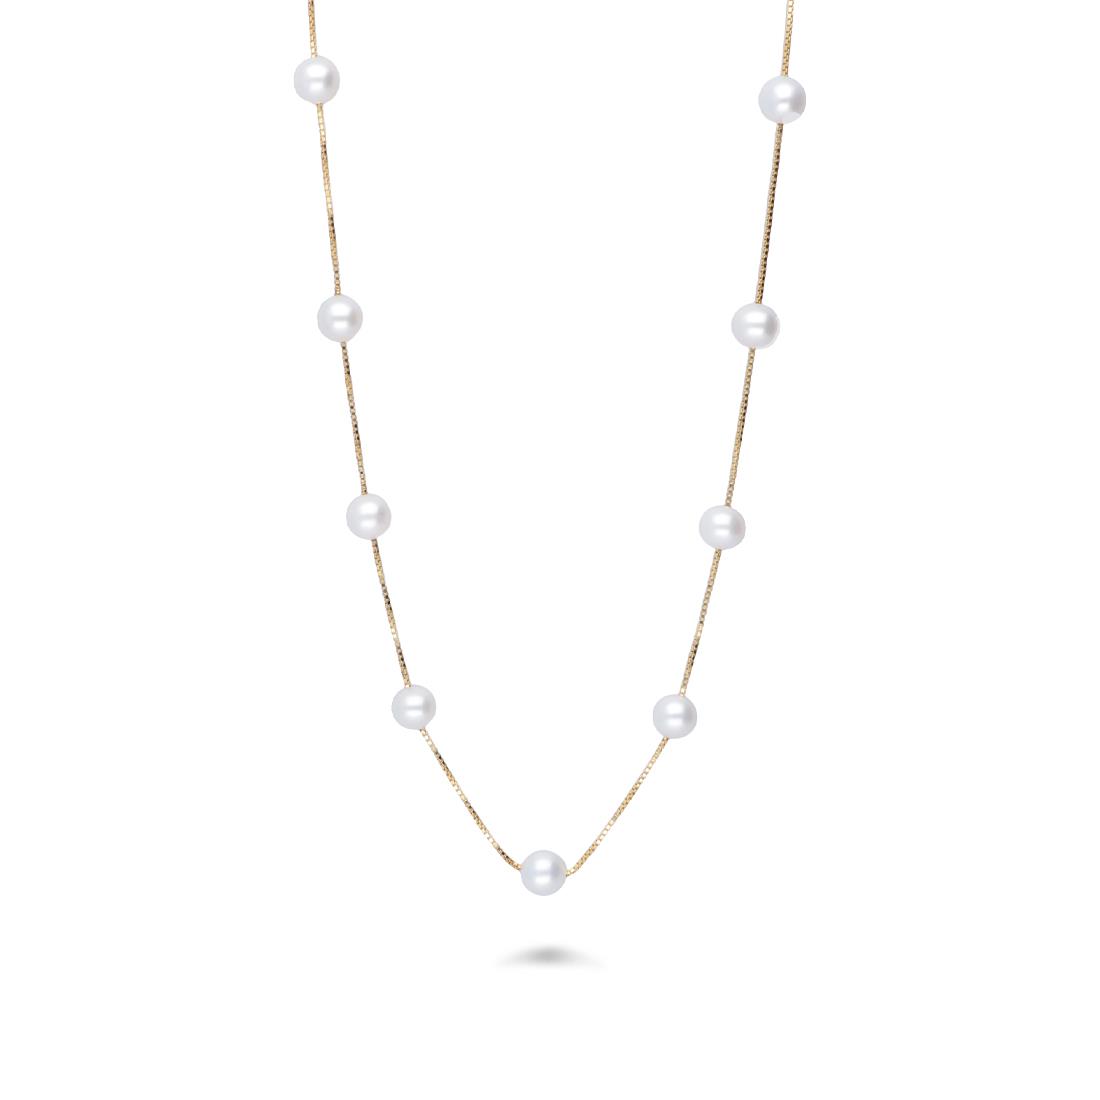 Golden silver necklace with fresh water pearls - MAYUMI